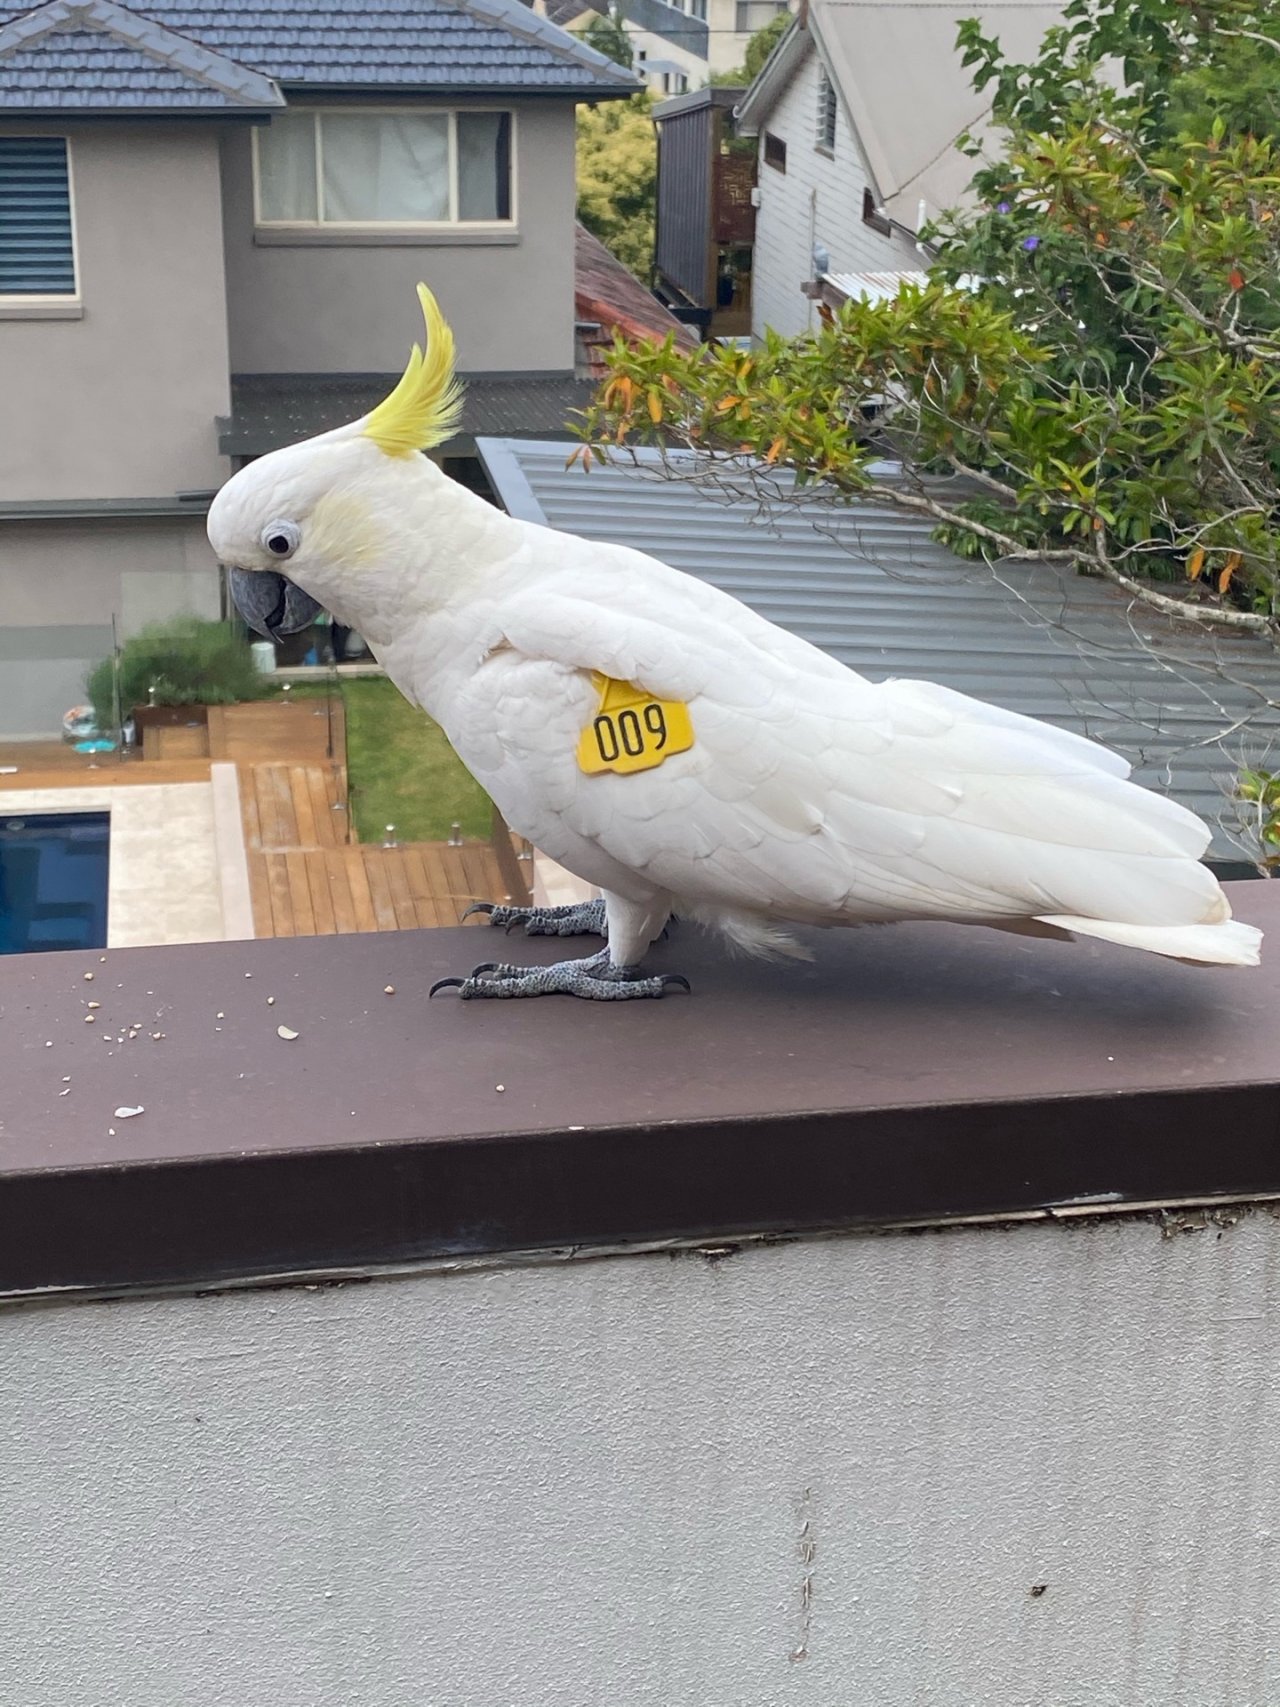 Sulphur-crested Cockatoo in Big City Birds App spotted by Maddiebelle on 12.12.2020